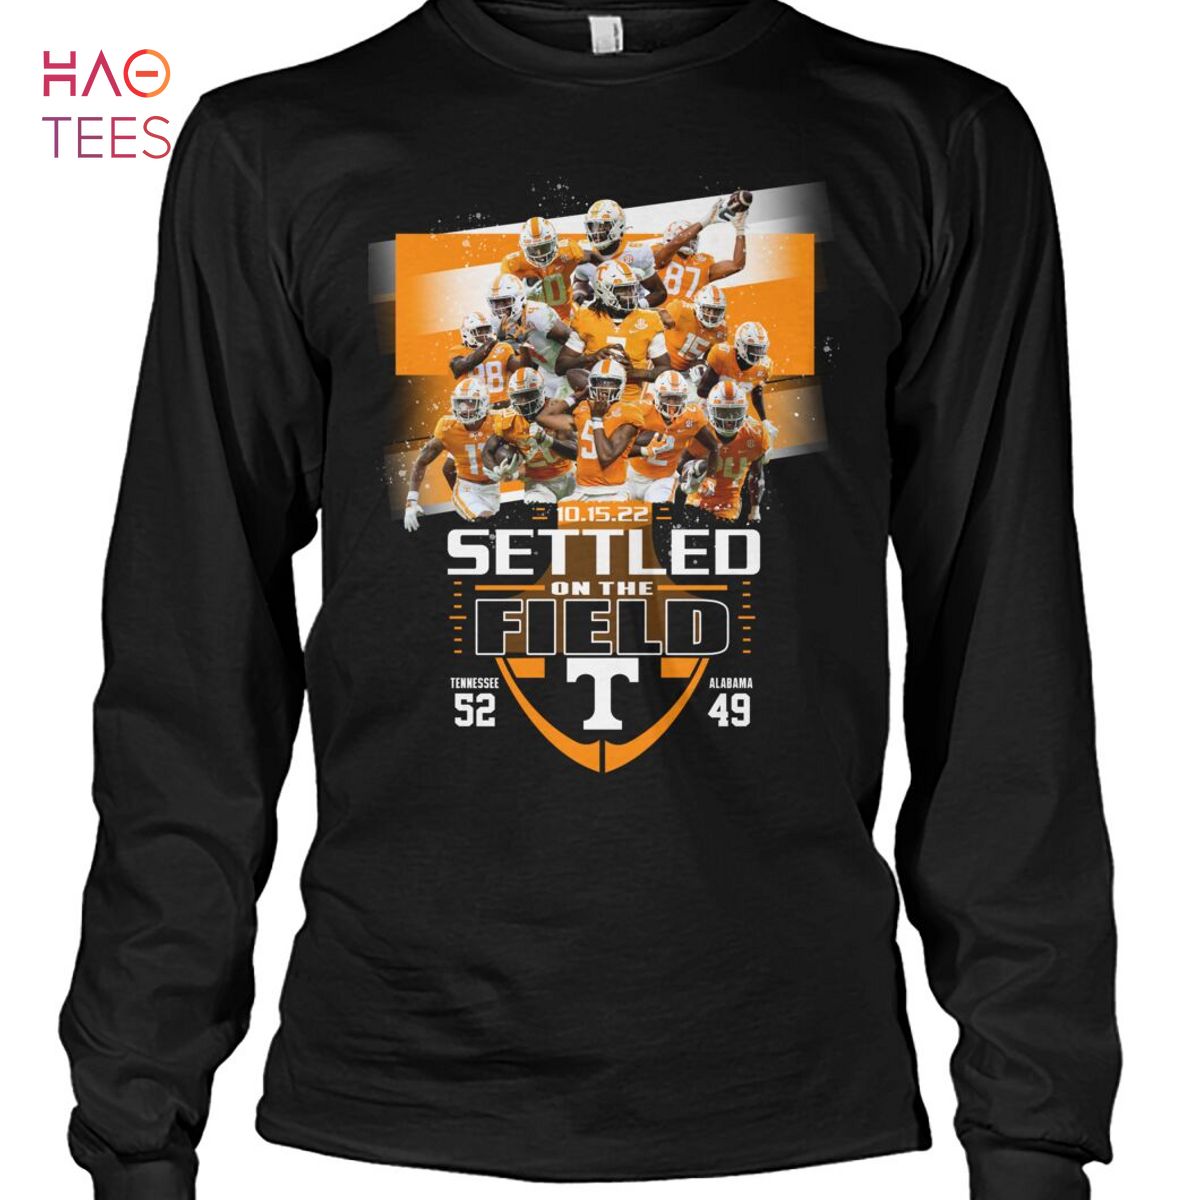 10.15.22 Settled On The Field Shirt